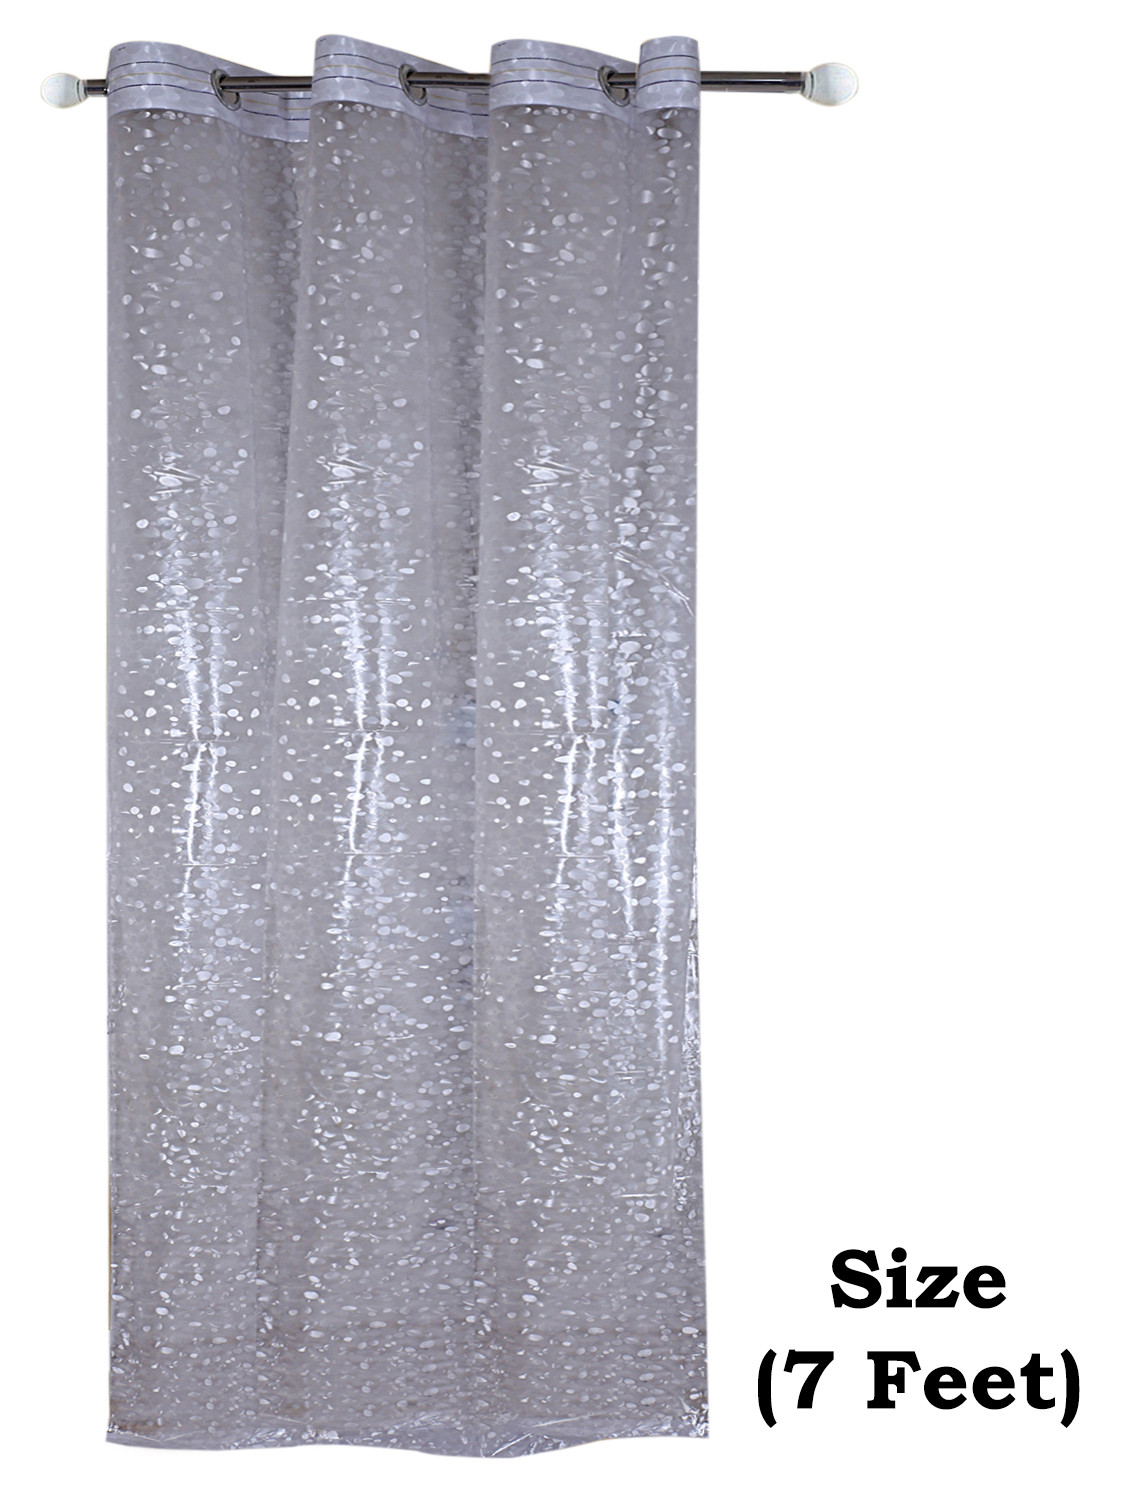 Kuber Industries Stone Print Stain-Resistant & Waterproof PVC AC Curtain For Home, office, restaurant 7 Feet With 6 Grommets (Transparent)